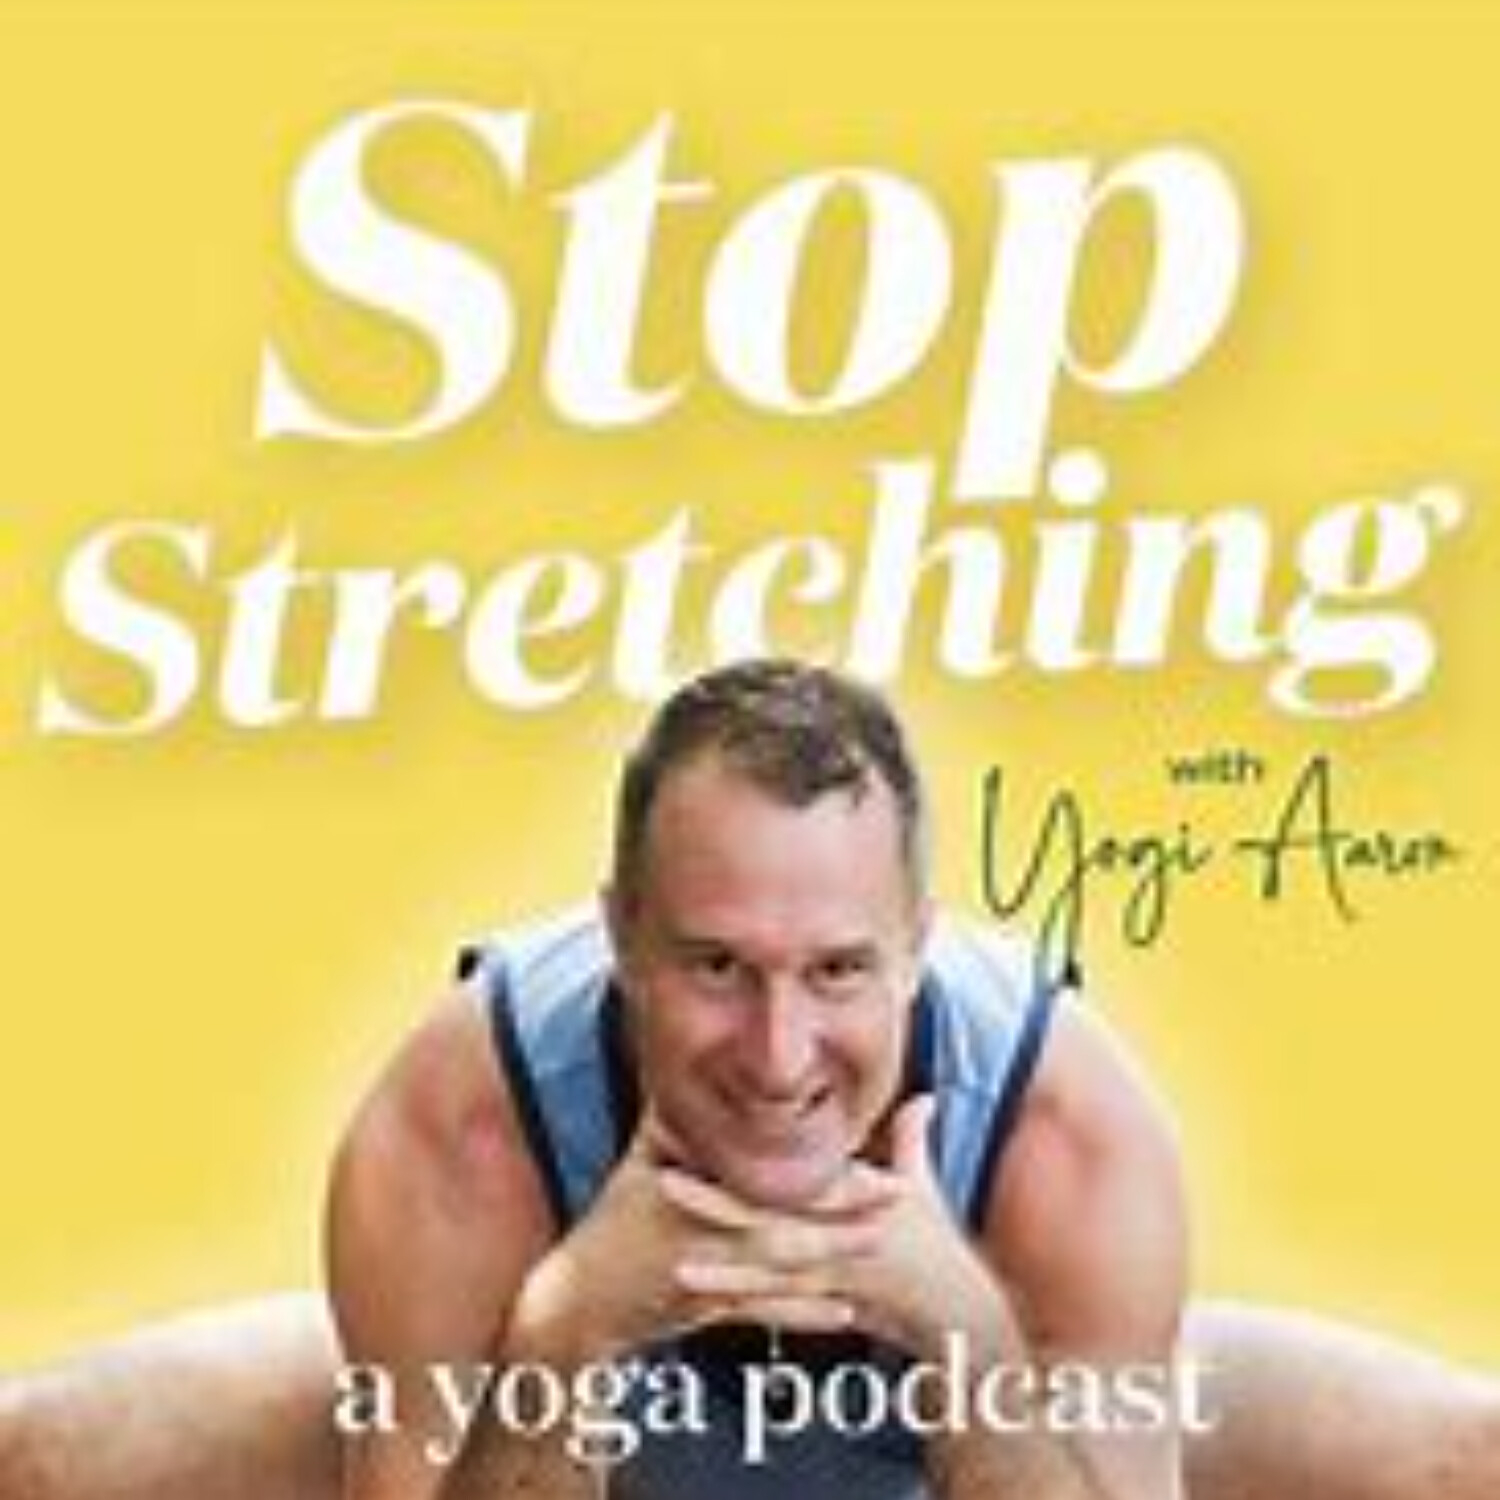 To Stretch Or Not To Stretch That is The Question! Answered by Revolutionary A.Y.A.M.A Founder Yogi Aaron